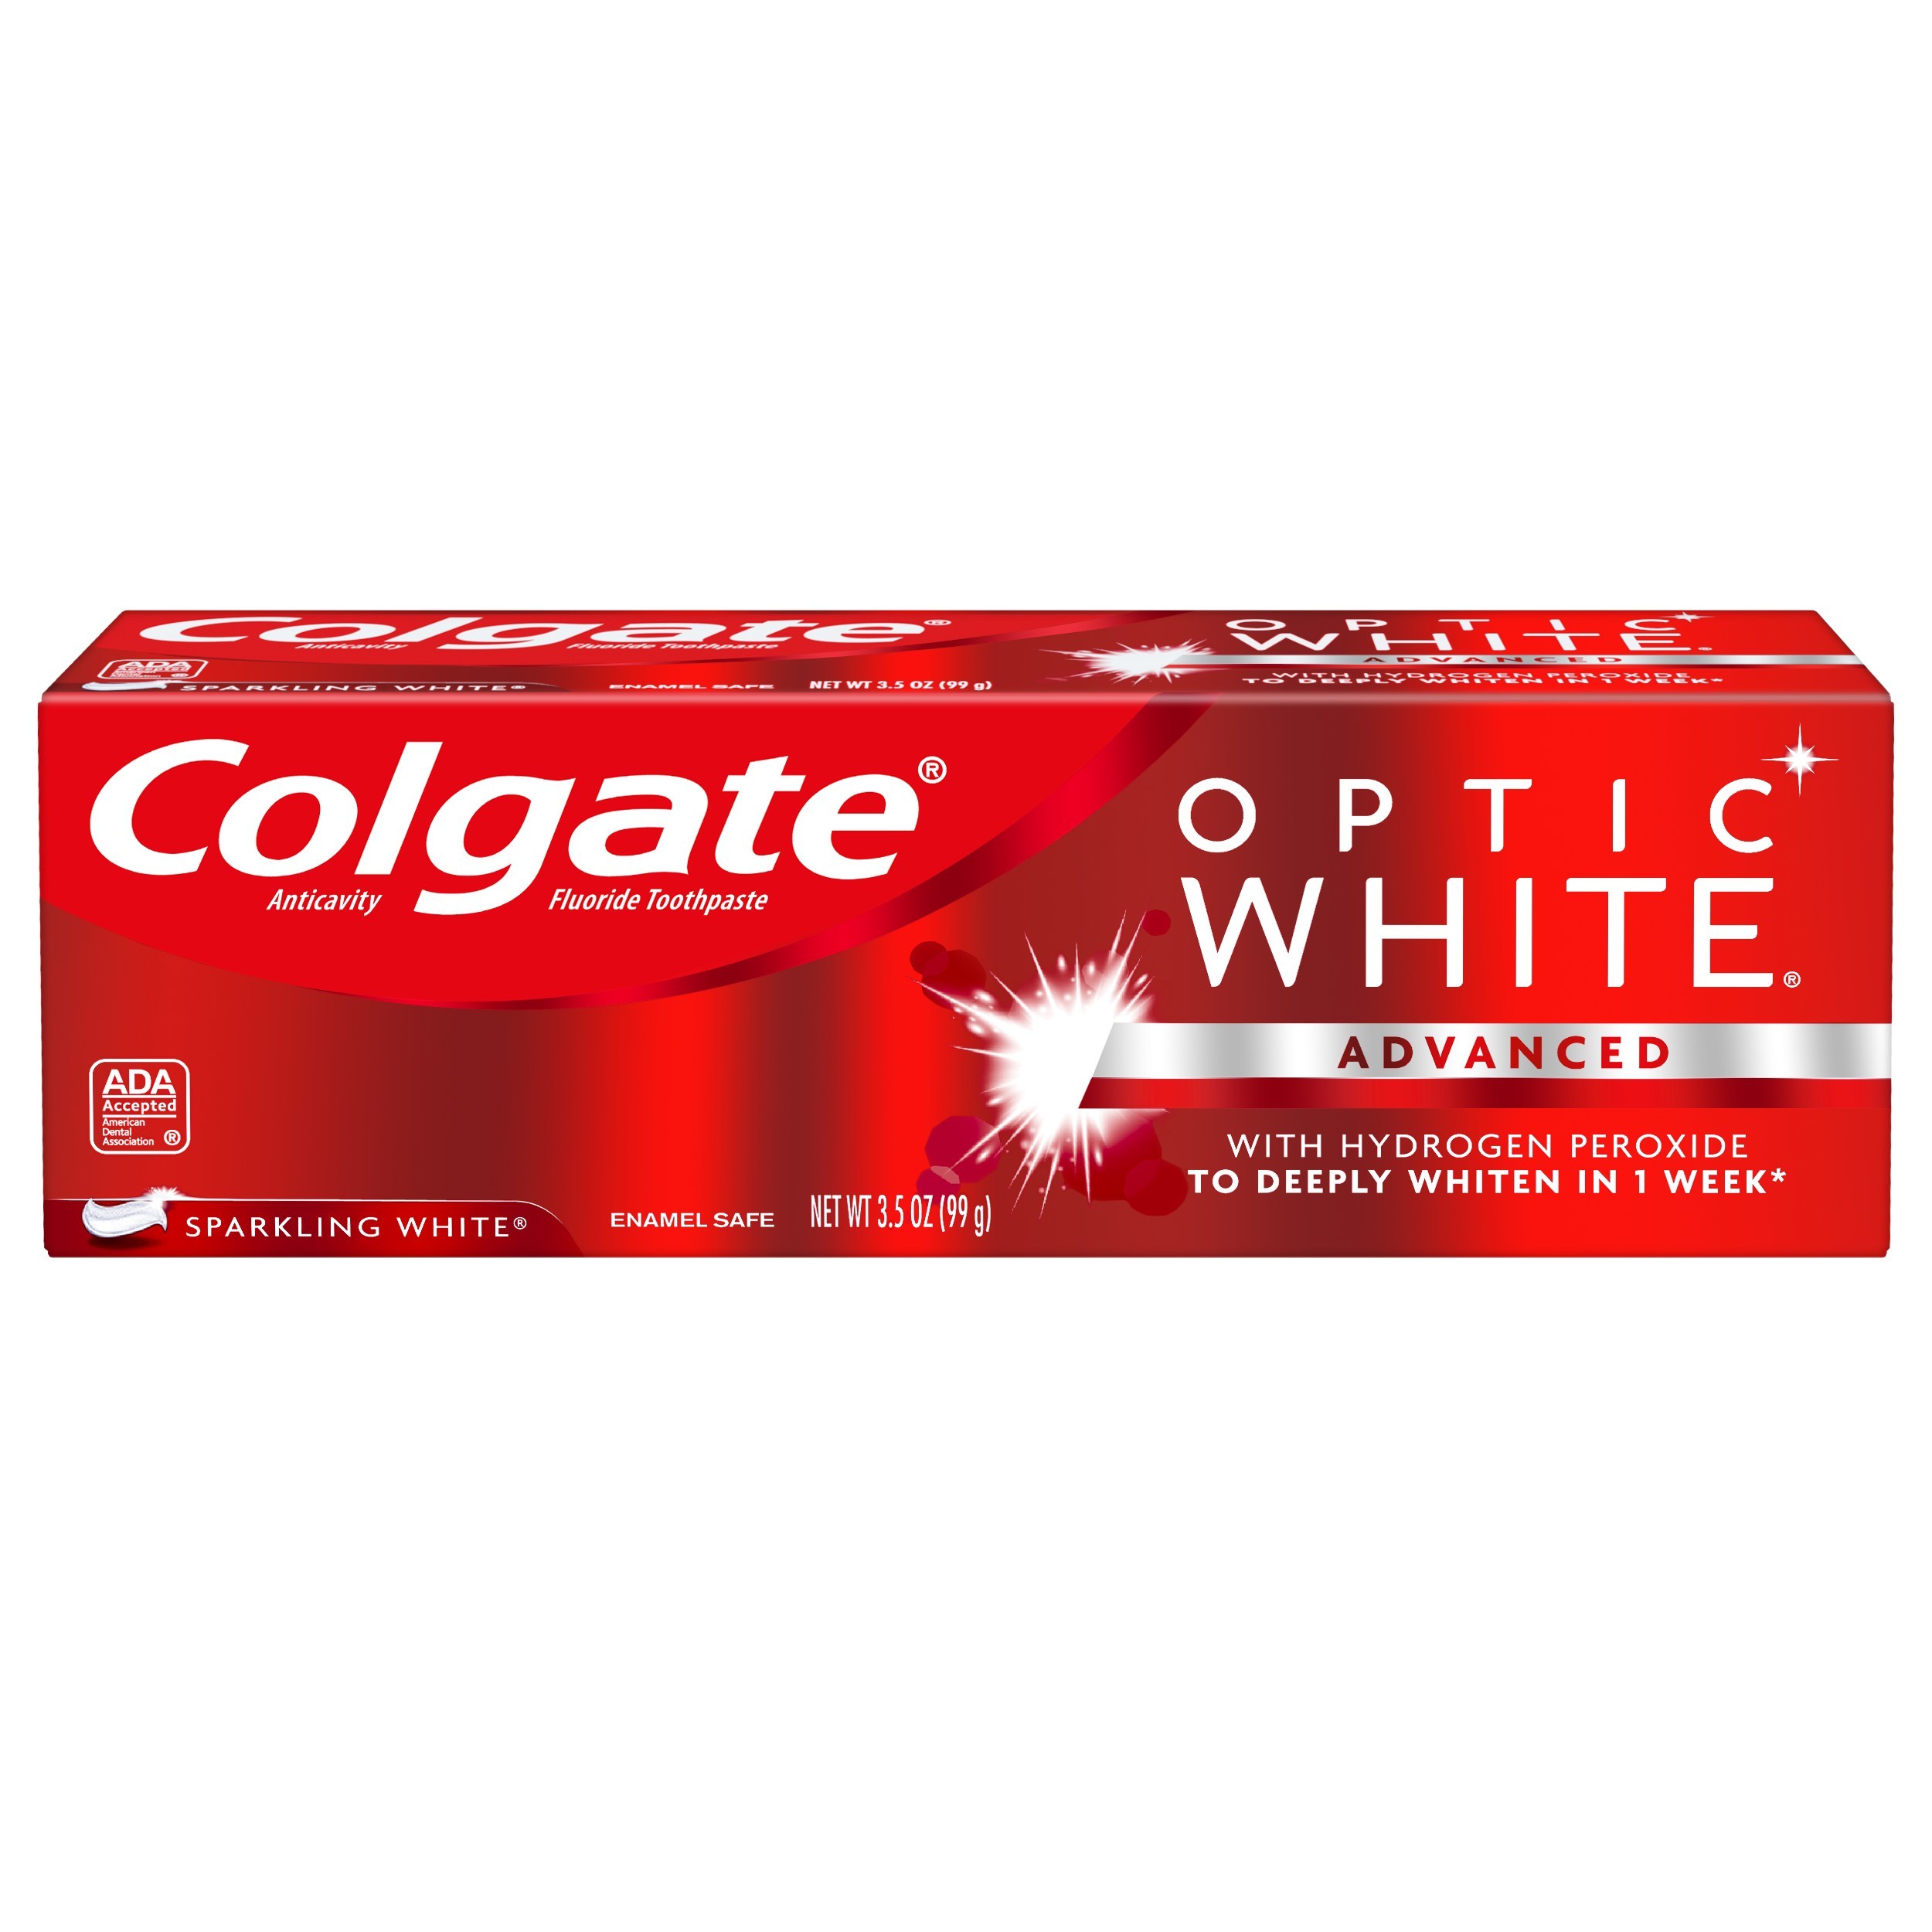 Colgate Optic White Advanced Sparkling White Becomes The First Toothpaste In The At Home Bleaching Category To Be Awarded The Ada Seal Of Acceptance